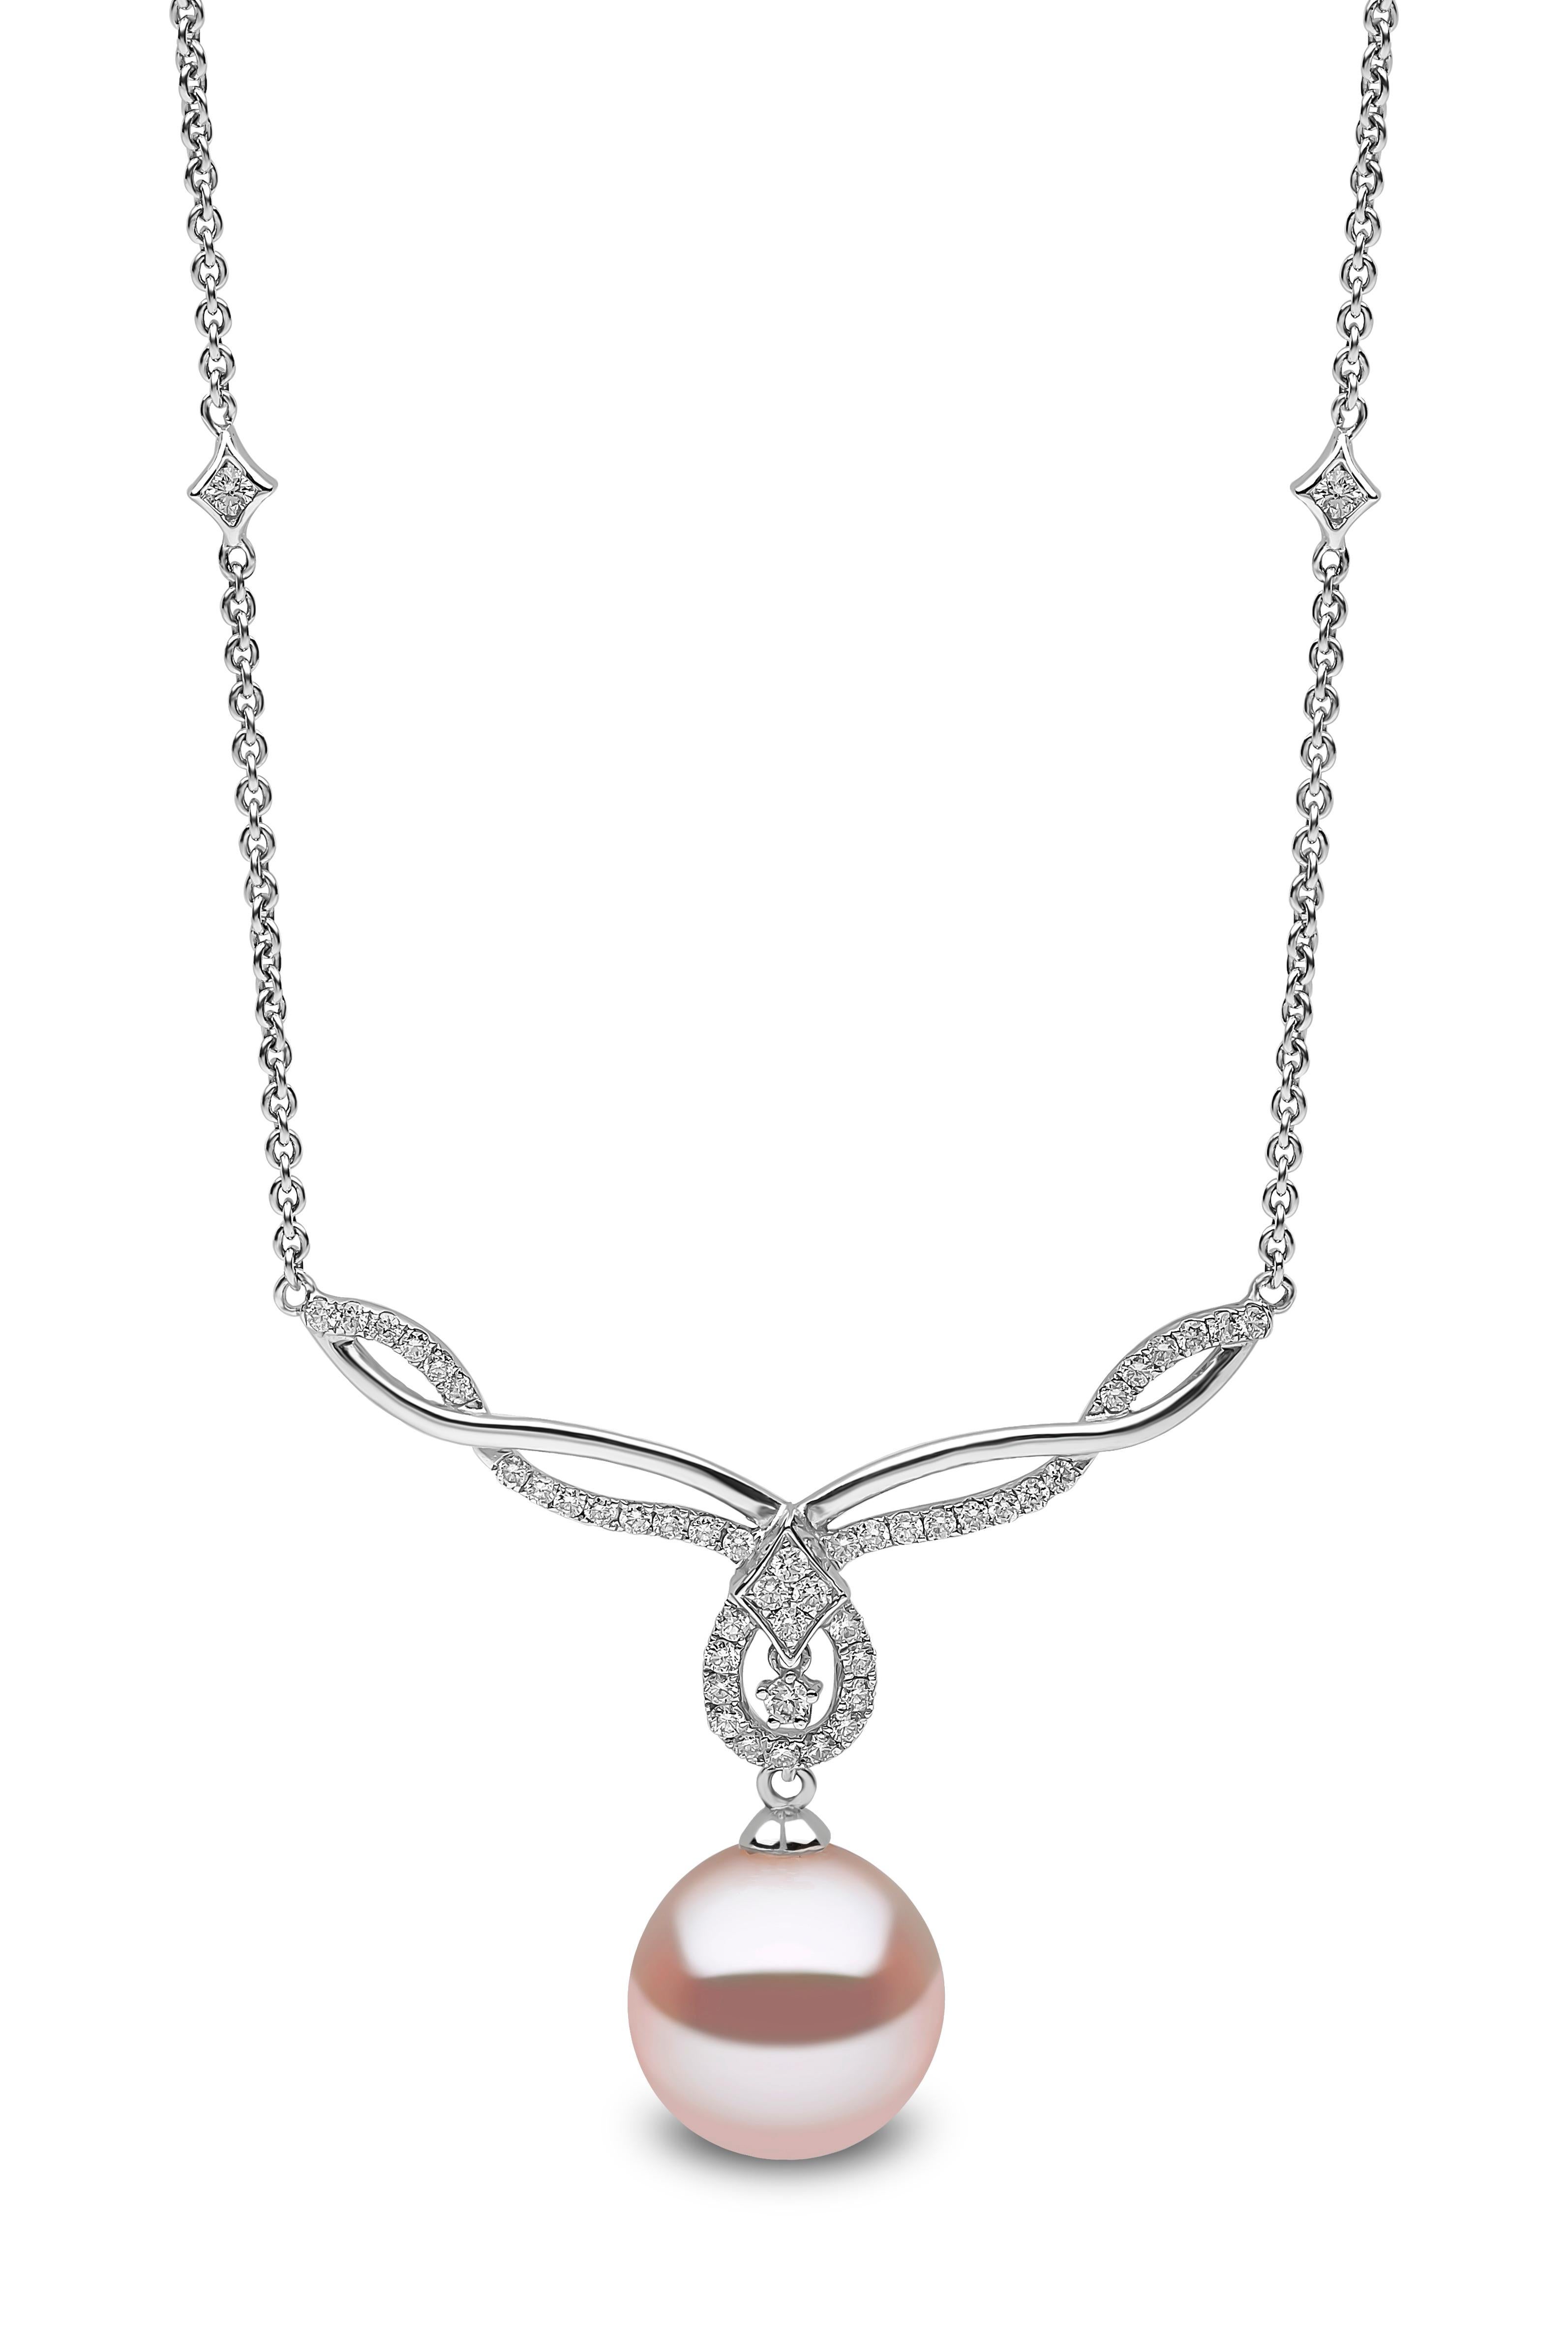 This elegant earring and pendant set by Yoko London features vivid pink Freshwater pearls beneath intricate diamond twists. The pearls at the centre of this set have been hand selected and expertly matched our London atelier for their unique hue.